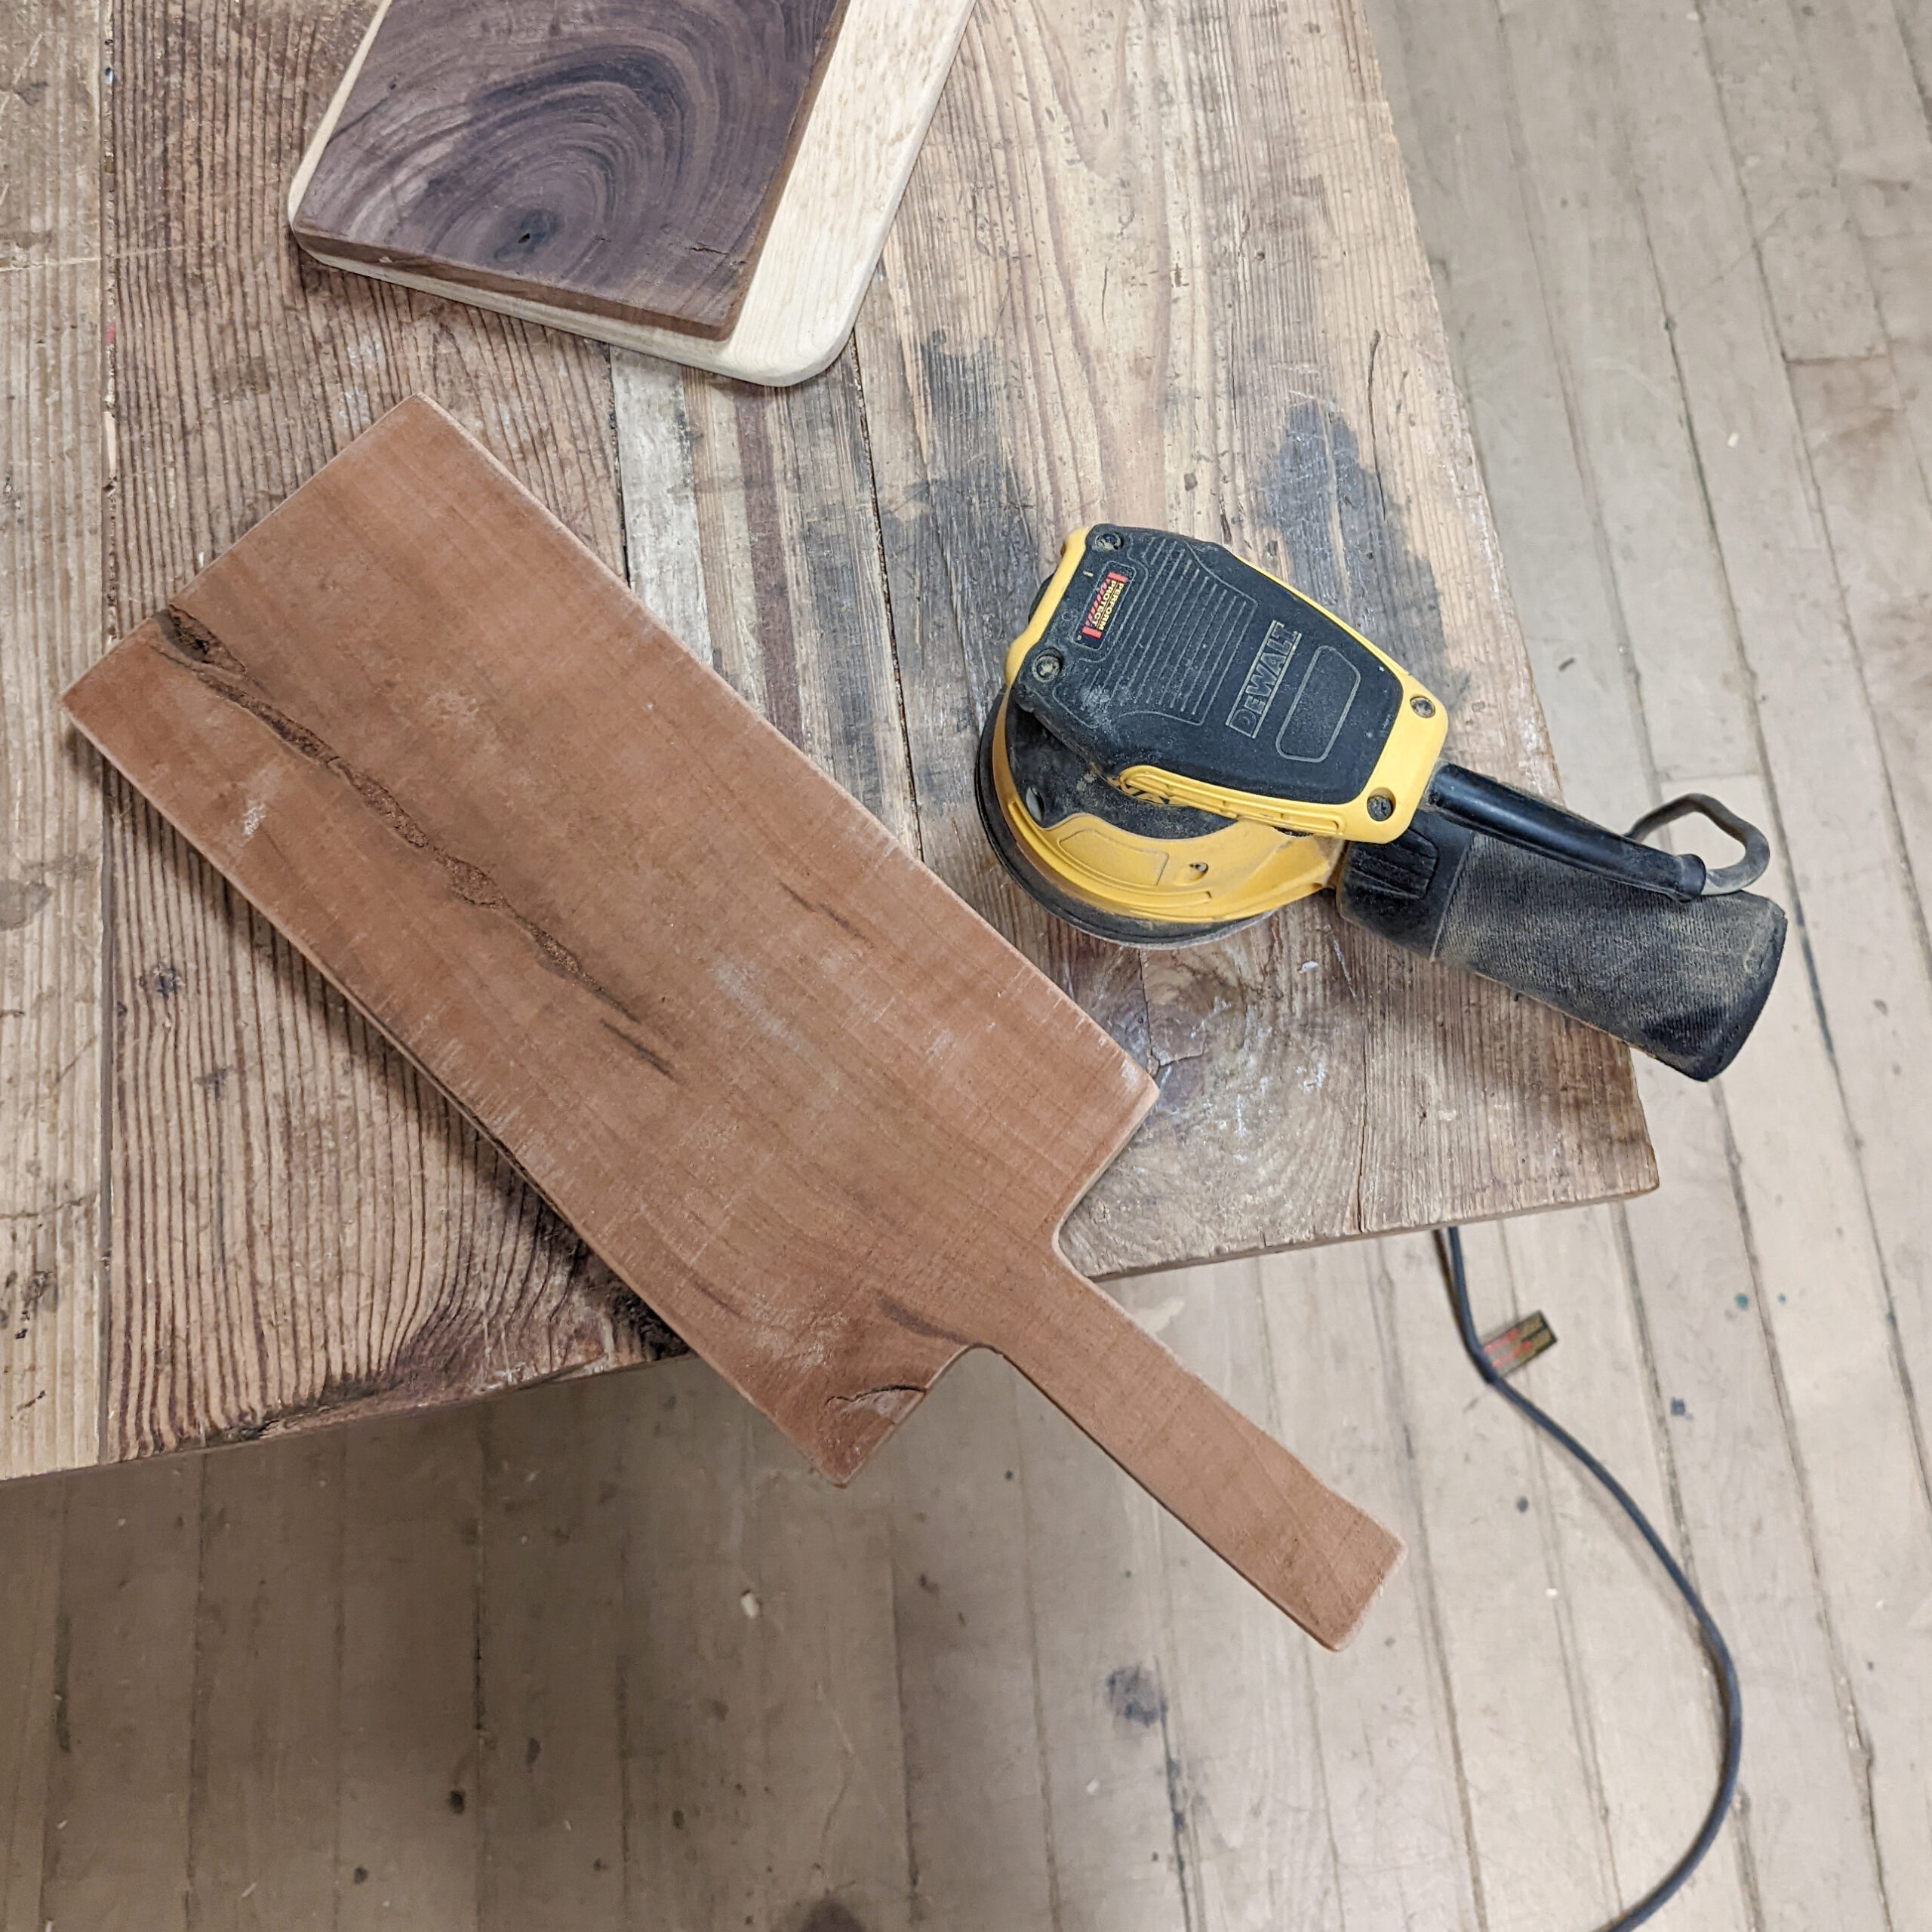 A palm sander helps soften edges of my DIY rustic cutting boards.